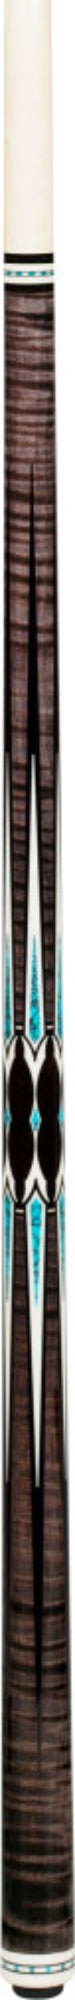 Pechauer PL-21 Limited Edition Pool Cue Pool Cue